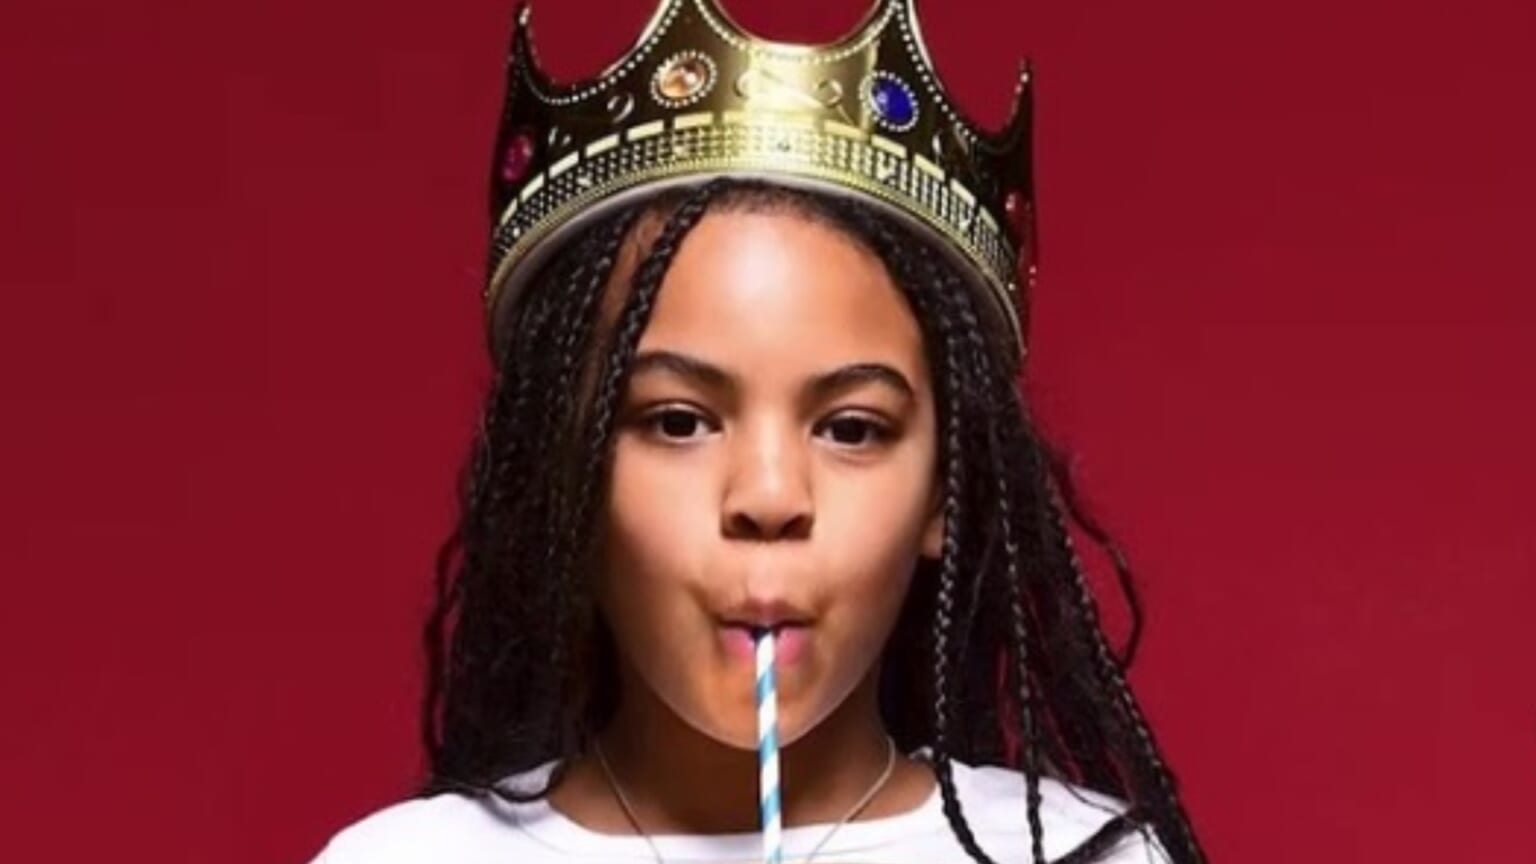 Blue Ivy Carter's Hair Routine: How to Brush Her Hair - wide 9